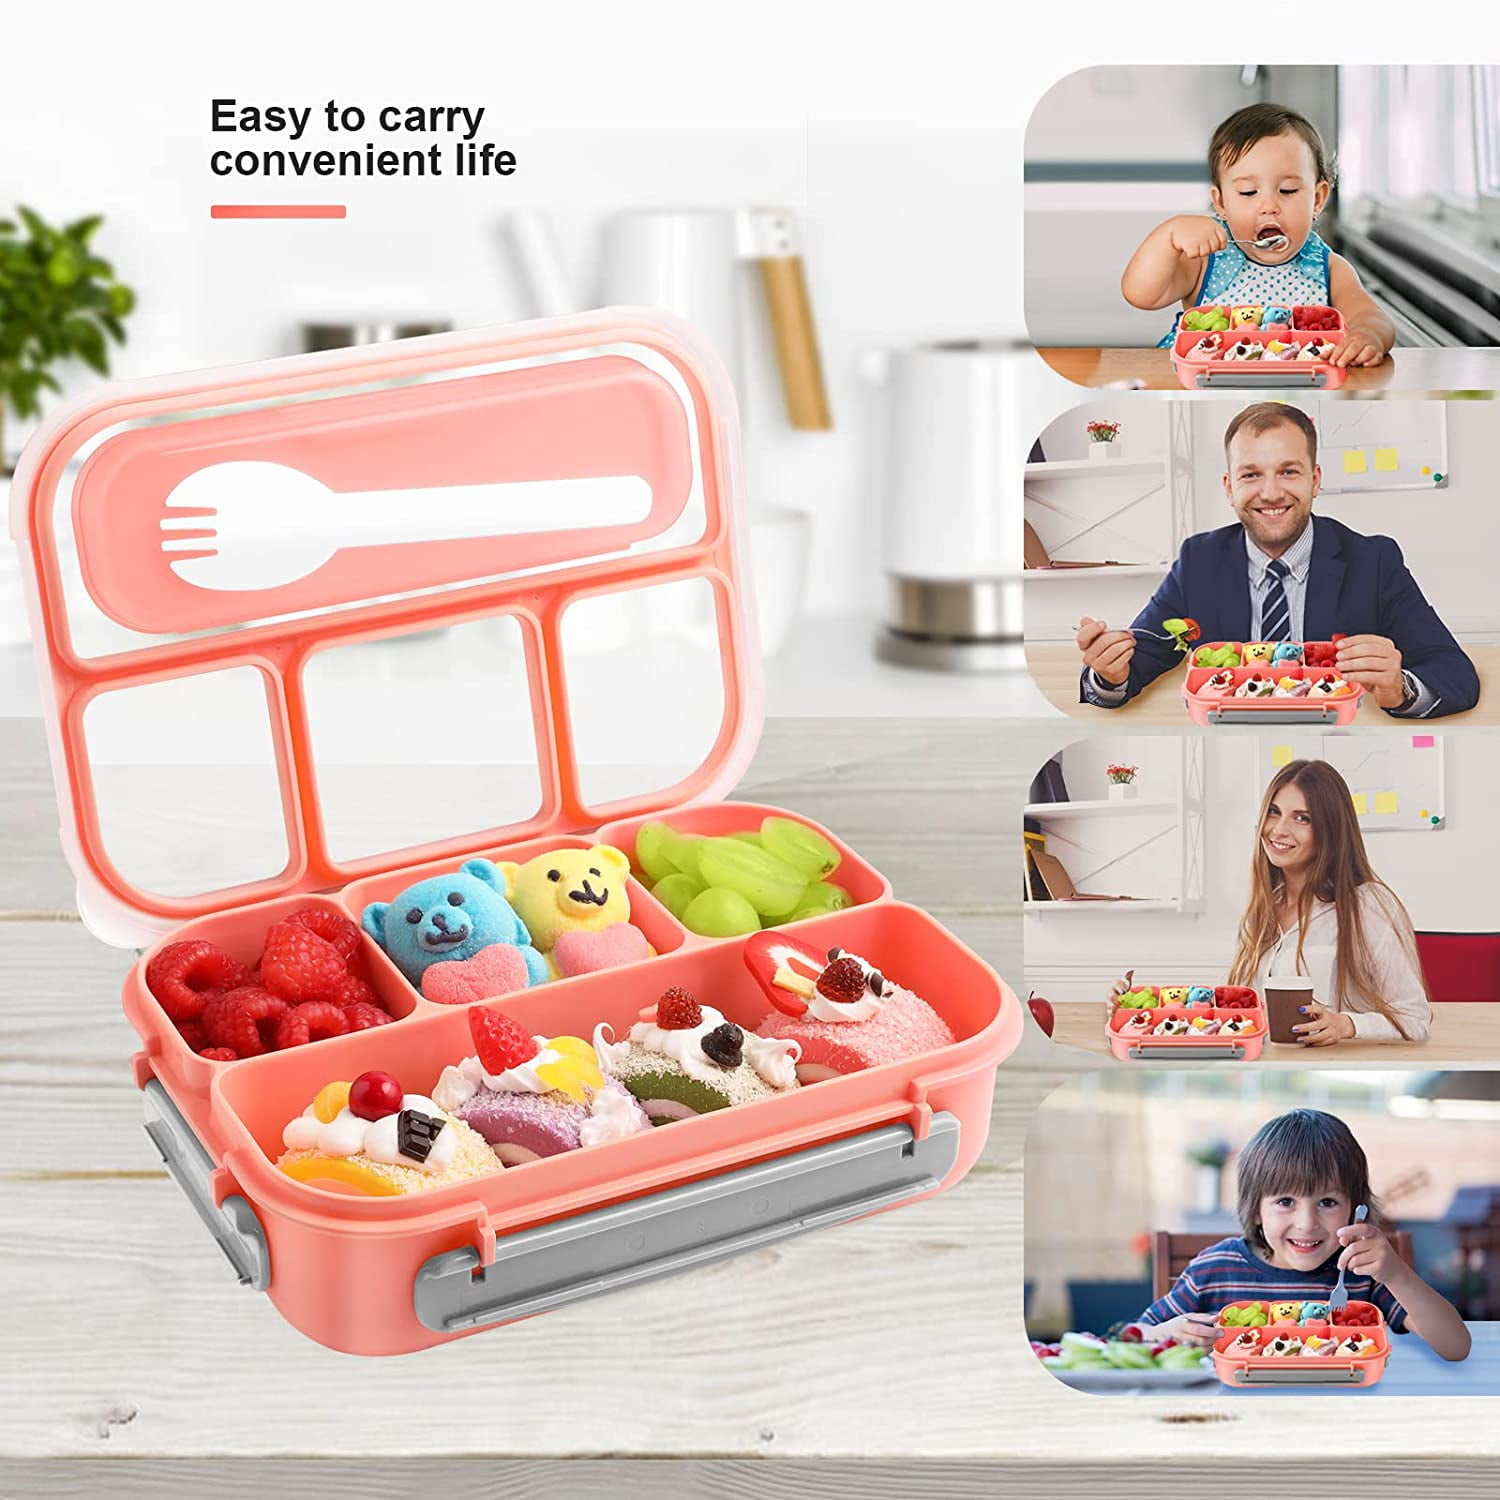 The Best Bento Boxes for Children and Adults 2018